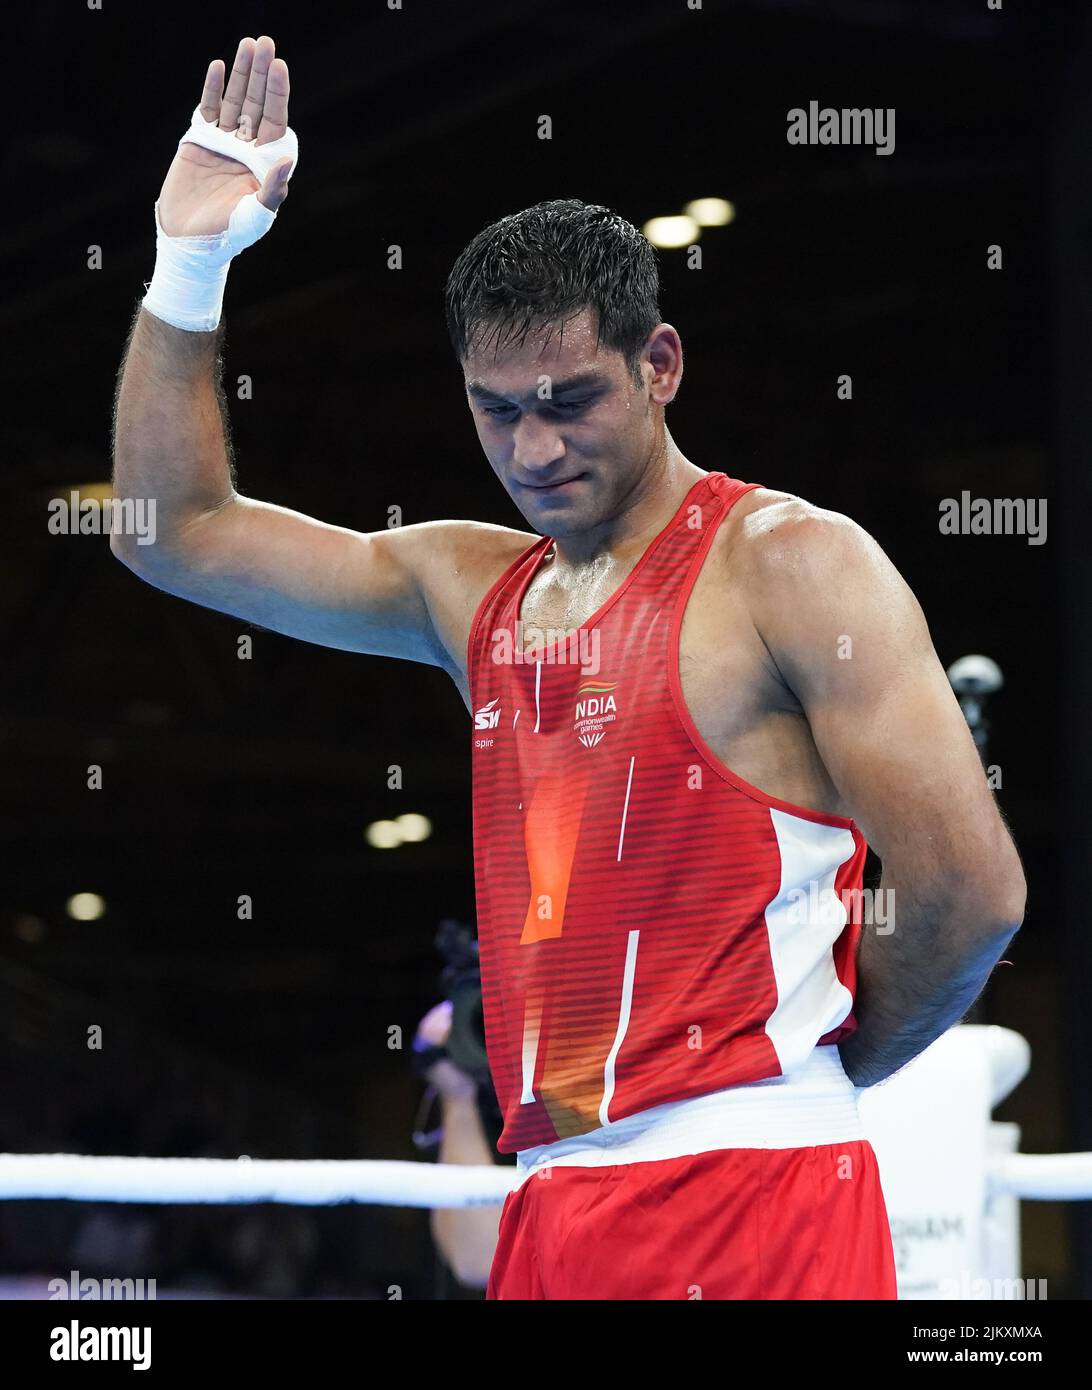 India's Ashish Kumar appears dejected following defeat against England's Aaron Bowen in the Men’s Over 75kg-80kg (Light Heavyweight) - Quarter-Final 3 at The NEC on day six of the 2022 Commonwealth Games in Birmingham. Picture date: Wednesday August 3, 2022. Stock Photo